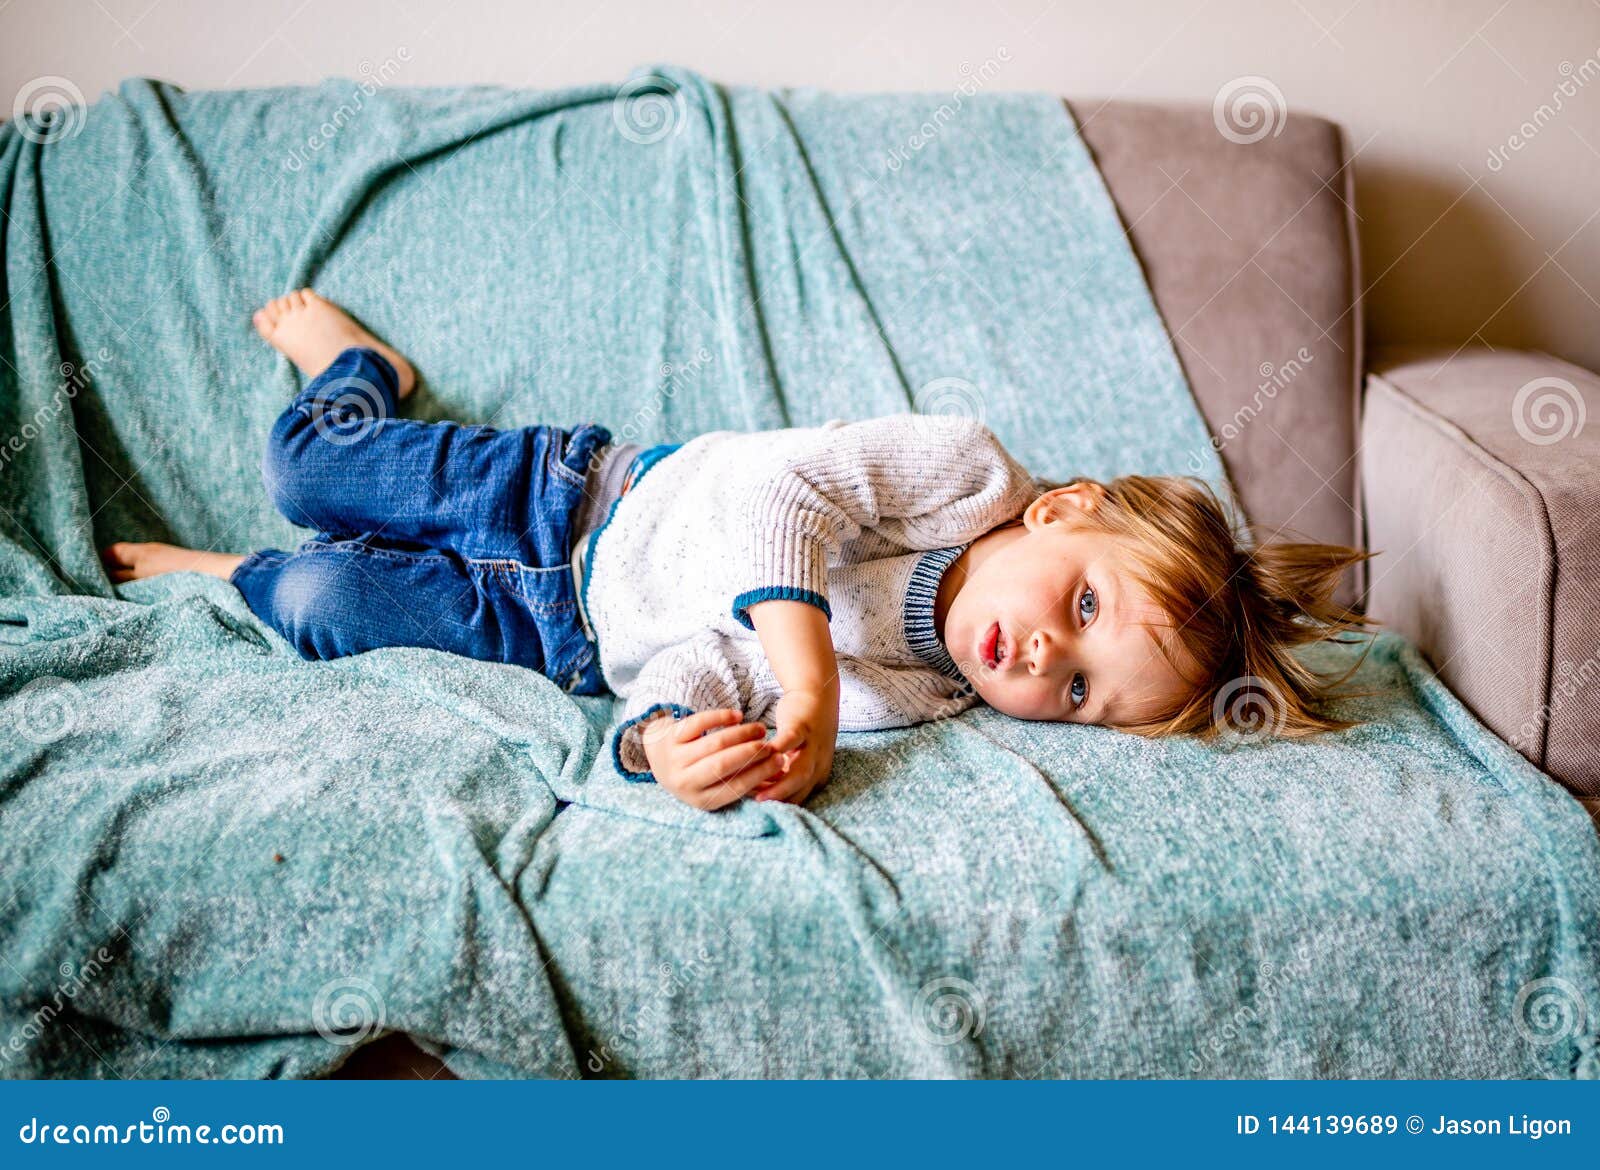 young boy lays on couch